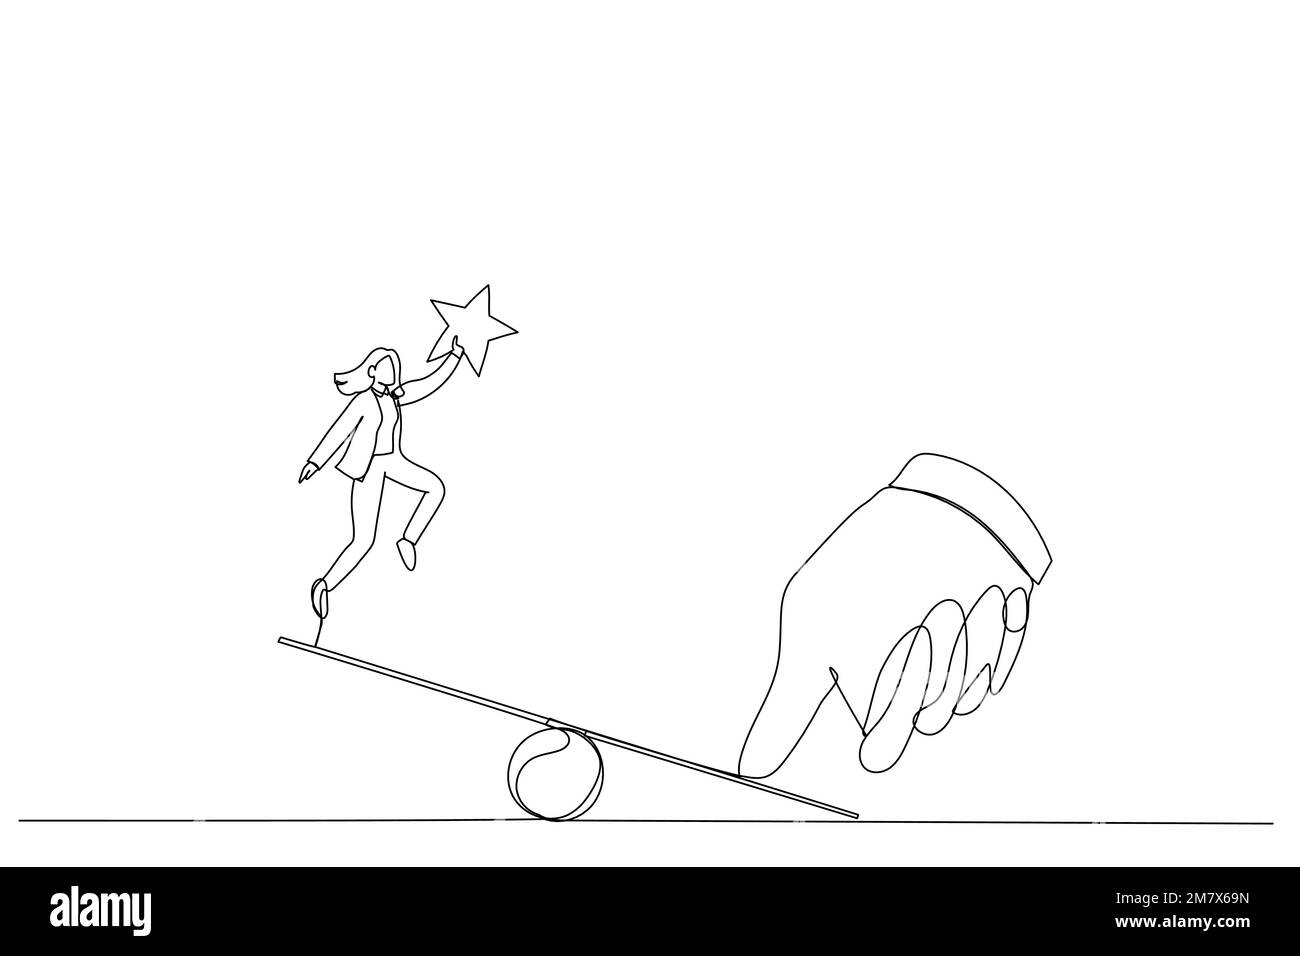 Drawing of giant thumb helping businesswoman to jump on seesaw. Single continuous line art style Stock Vector